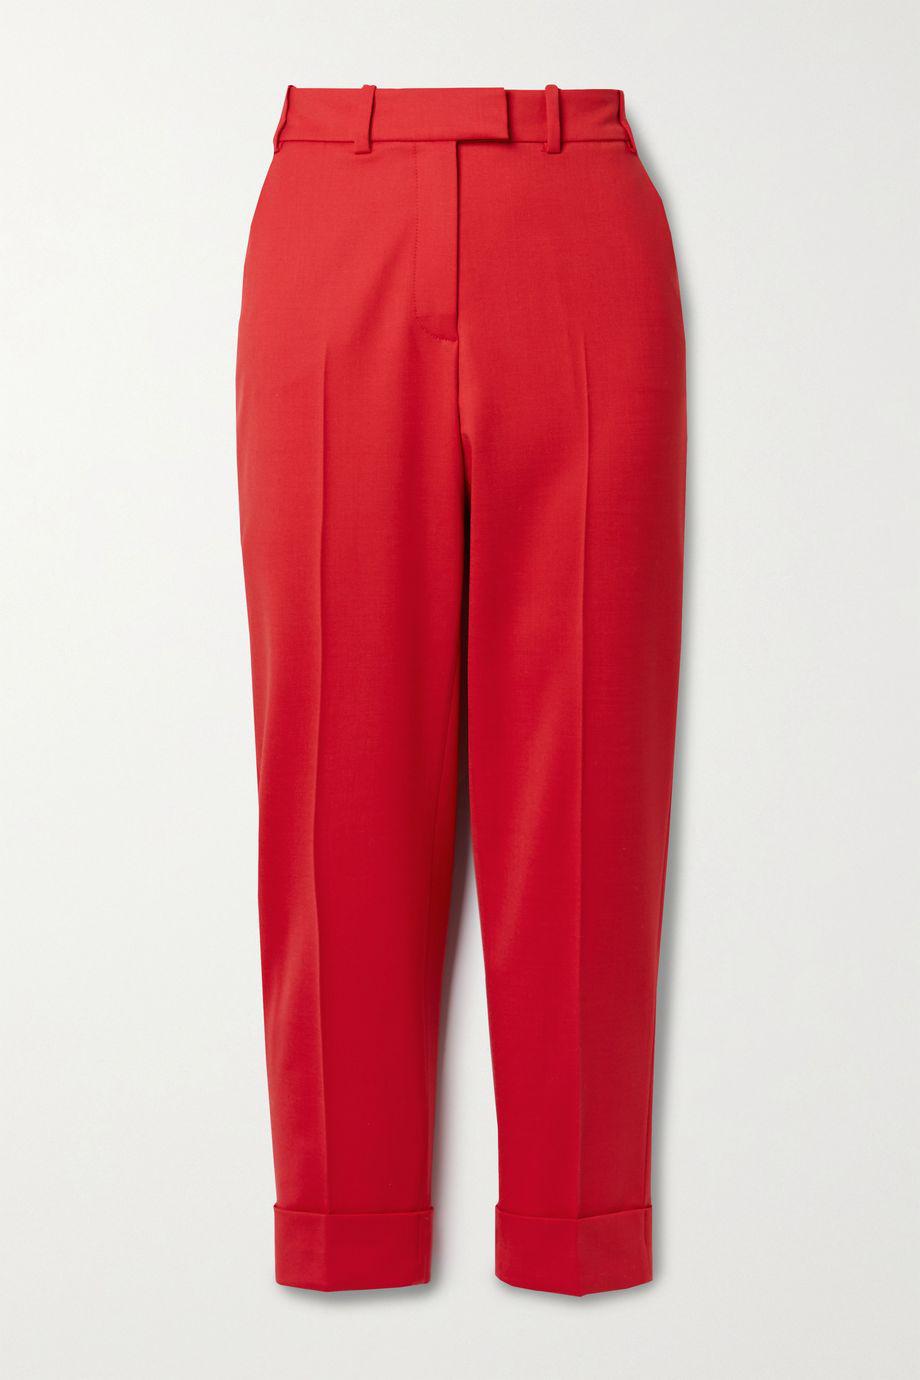 Clement cropped twill slim-leg pants by CEFINN